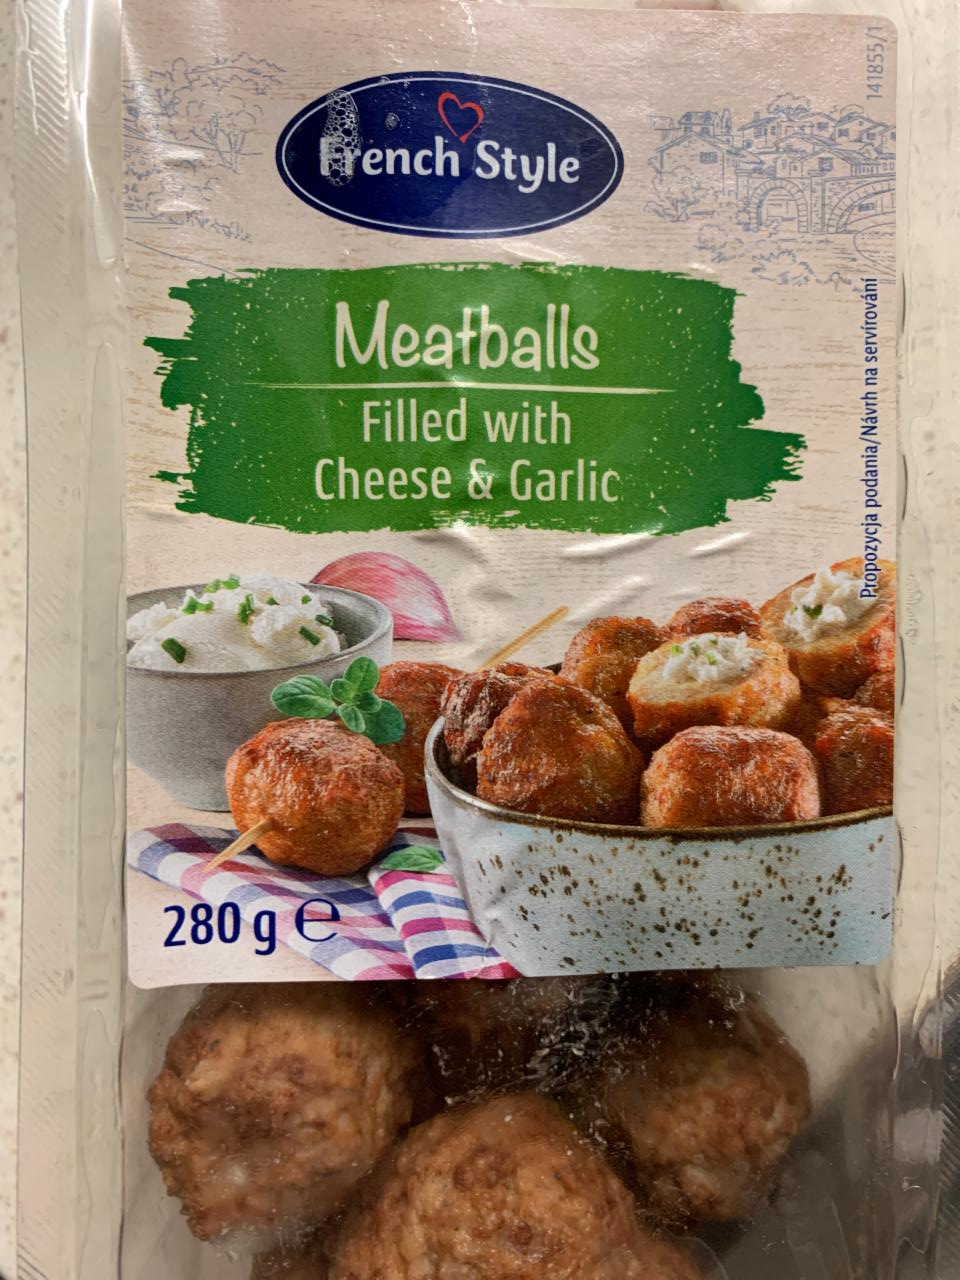 Fotografie - Meatballs Filled with Cheese & Garlic French style